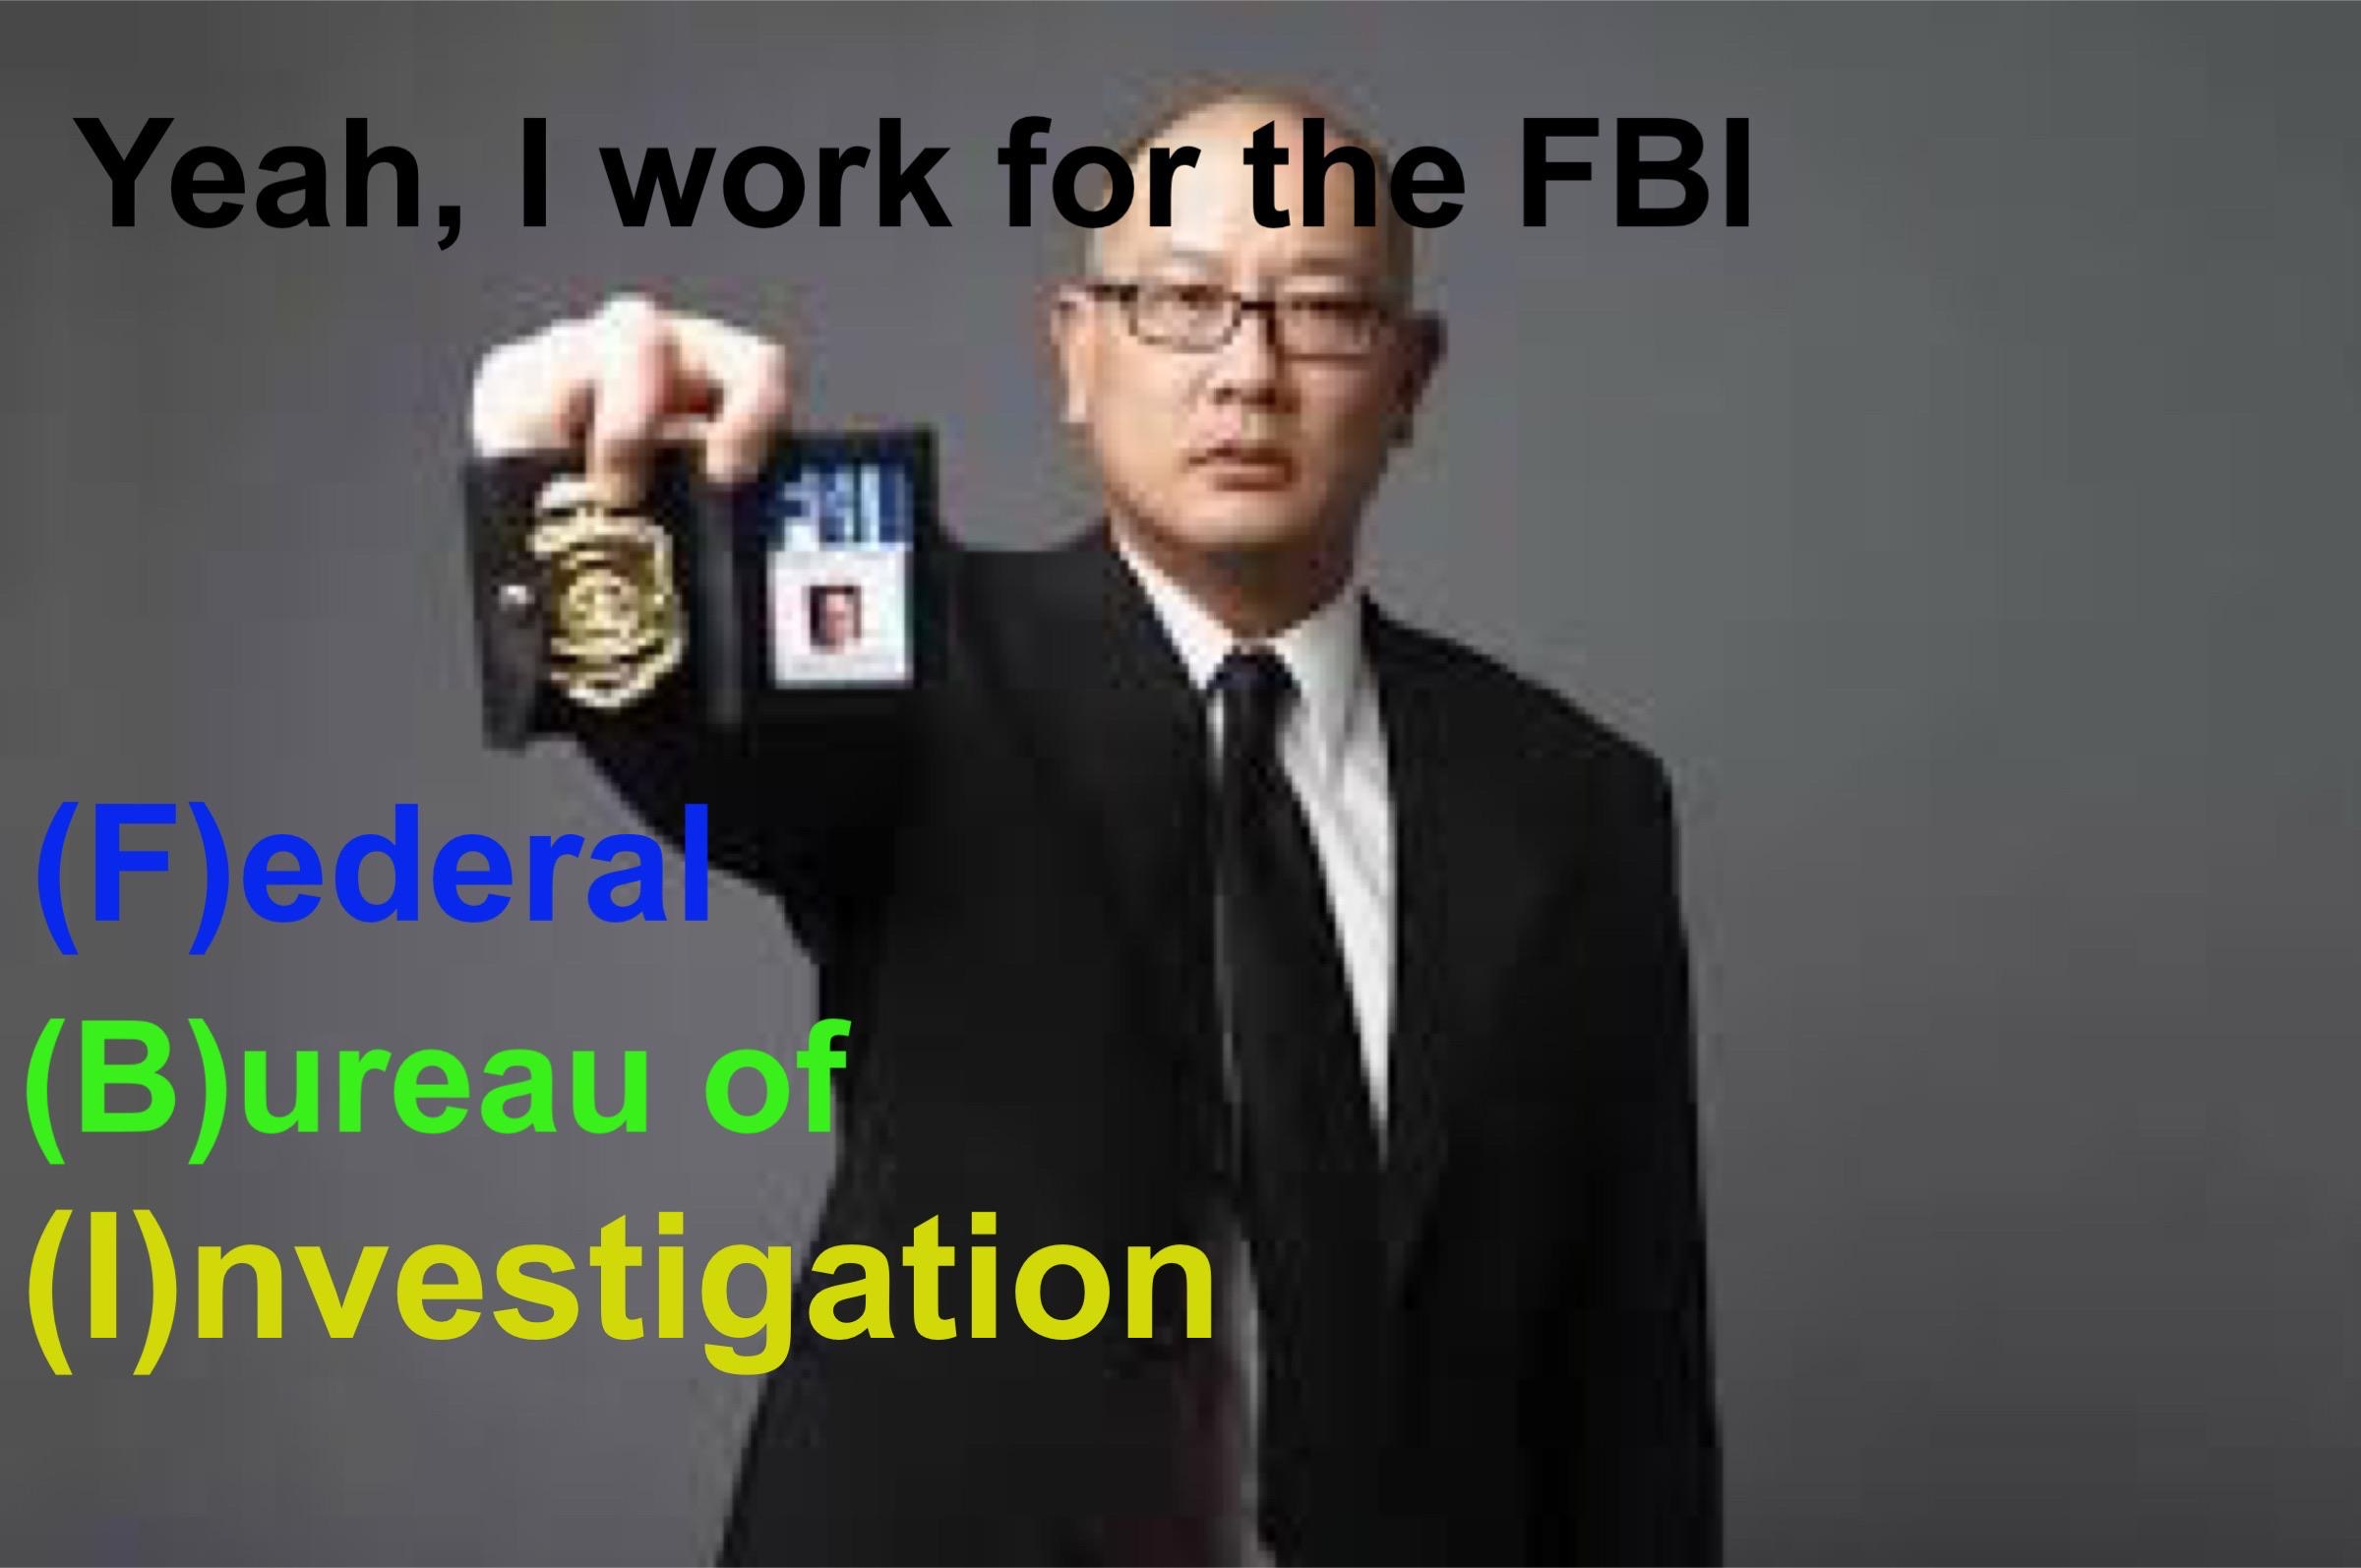 microphone - Yeah, I work for the Fbi Federal Bureau of Investigation